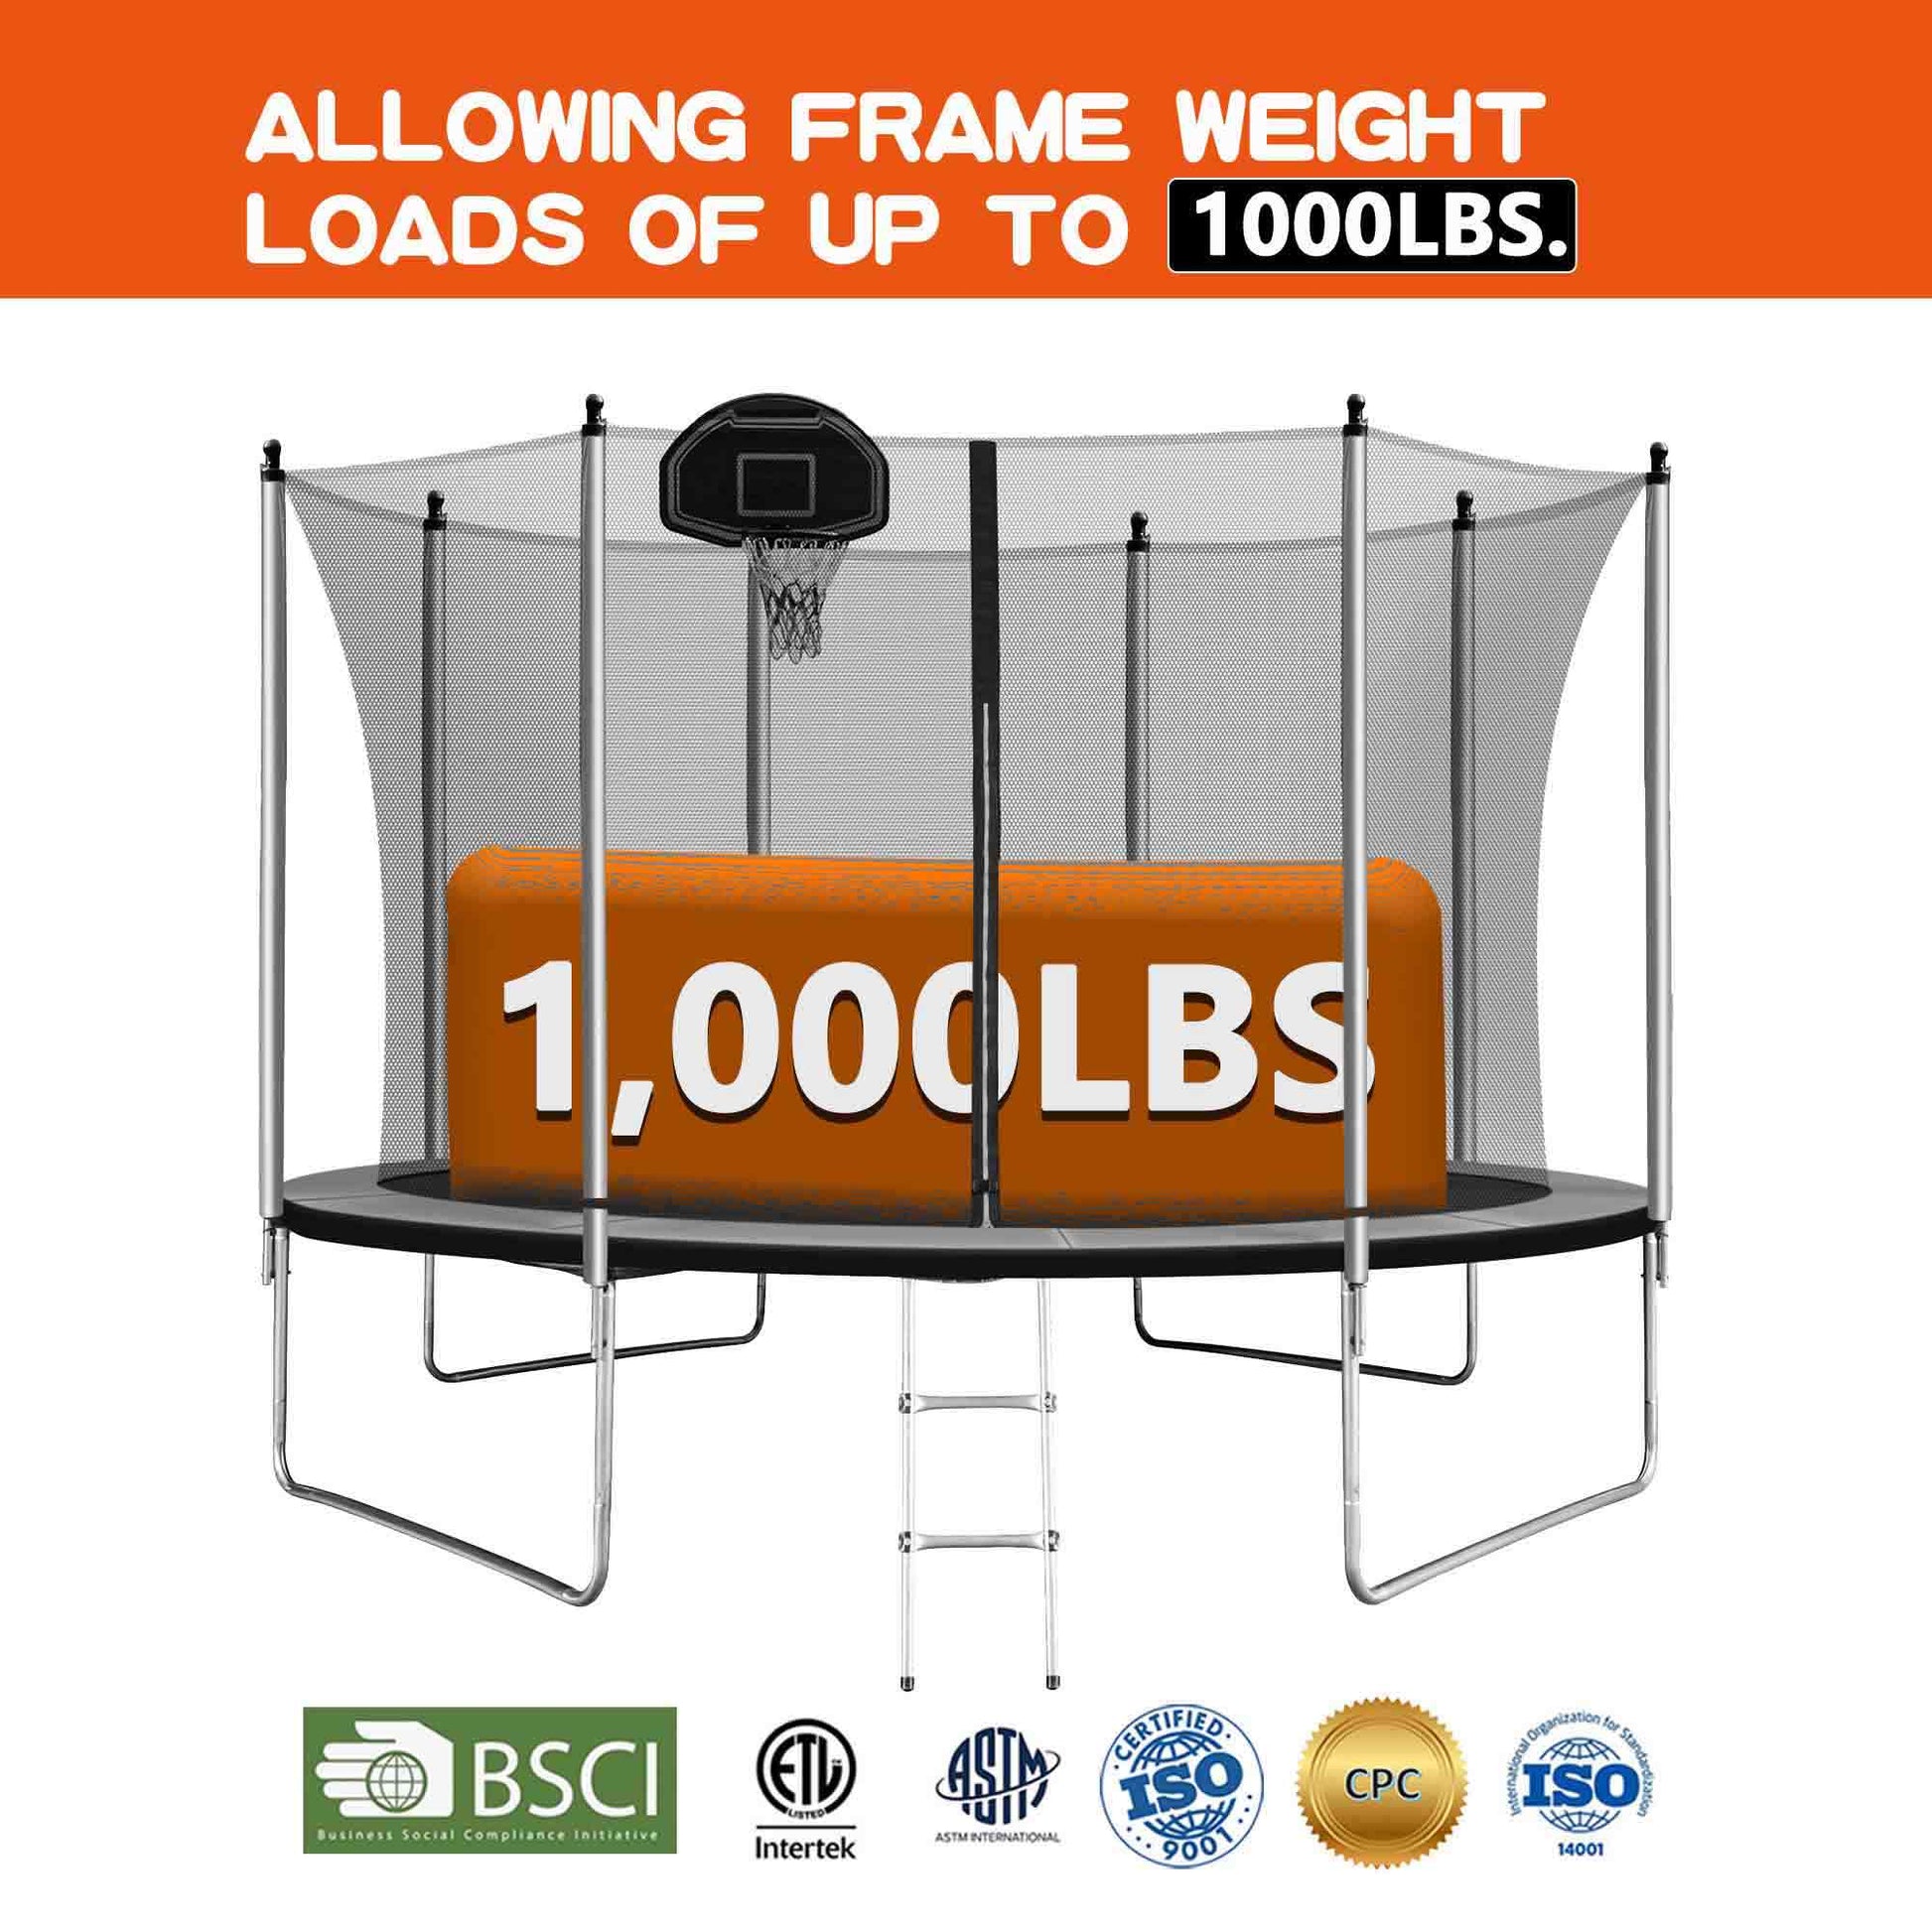 10ft trampoline ALLOWING FRAME WEIGHT LOADS OF UP TO 1000LBS